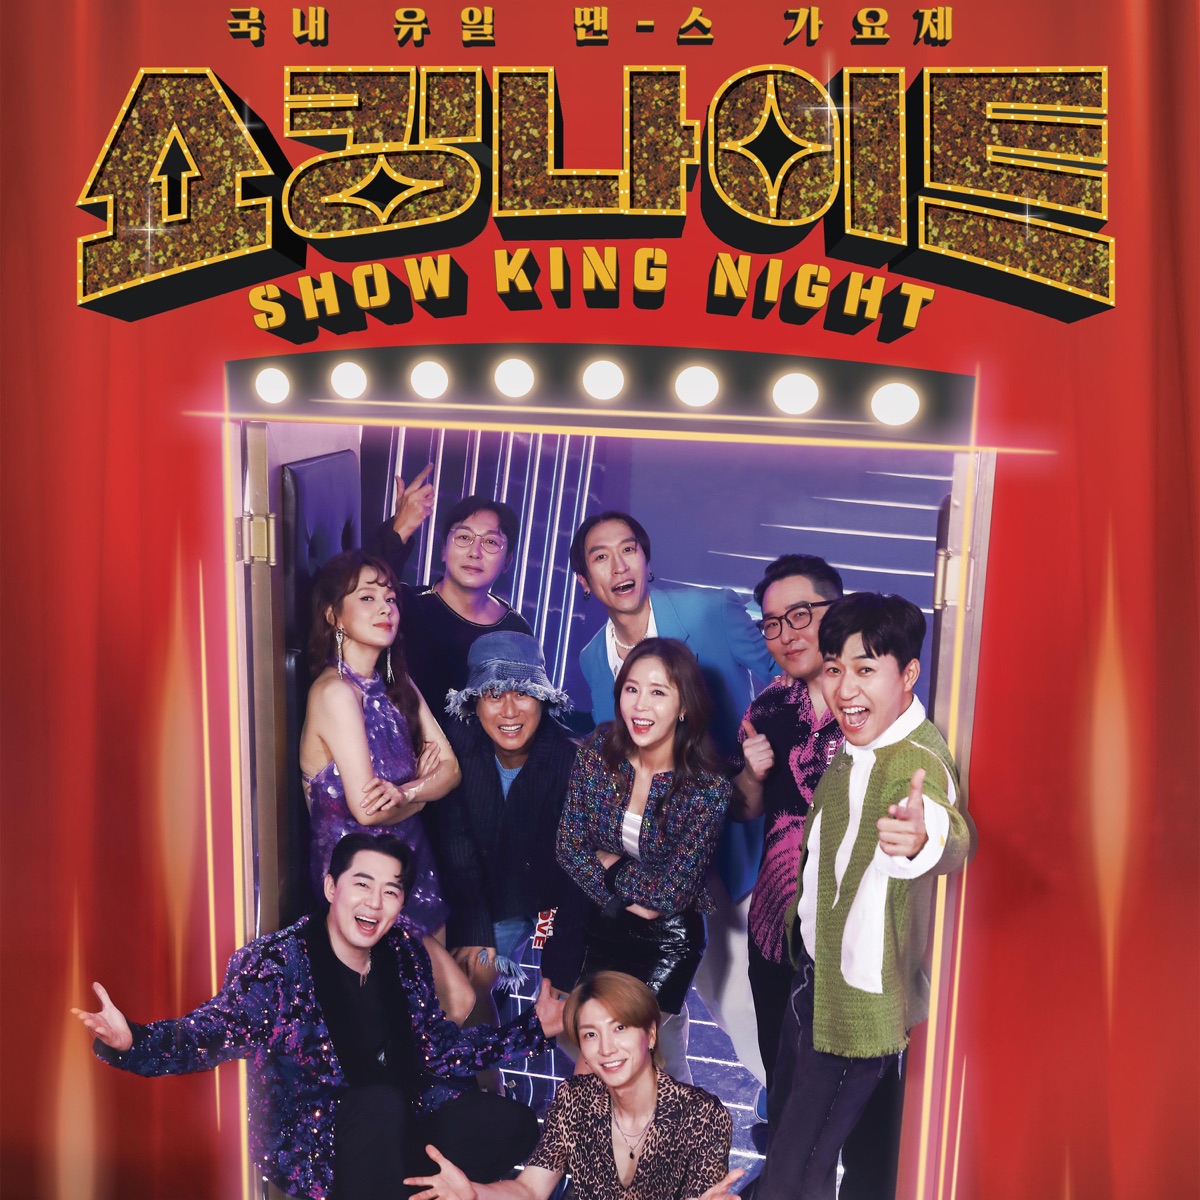 KWON SISTER'S, HI CUTIE & DDADDABLE - MBN SHOW KING NIGHT EP.6 (2023) [iTunes Plus AAC M4A]-新房子